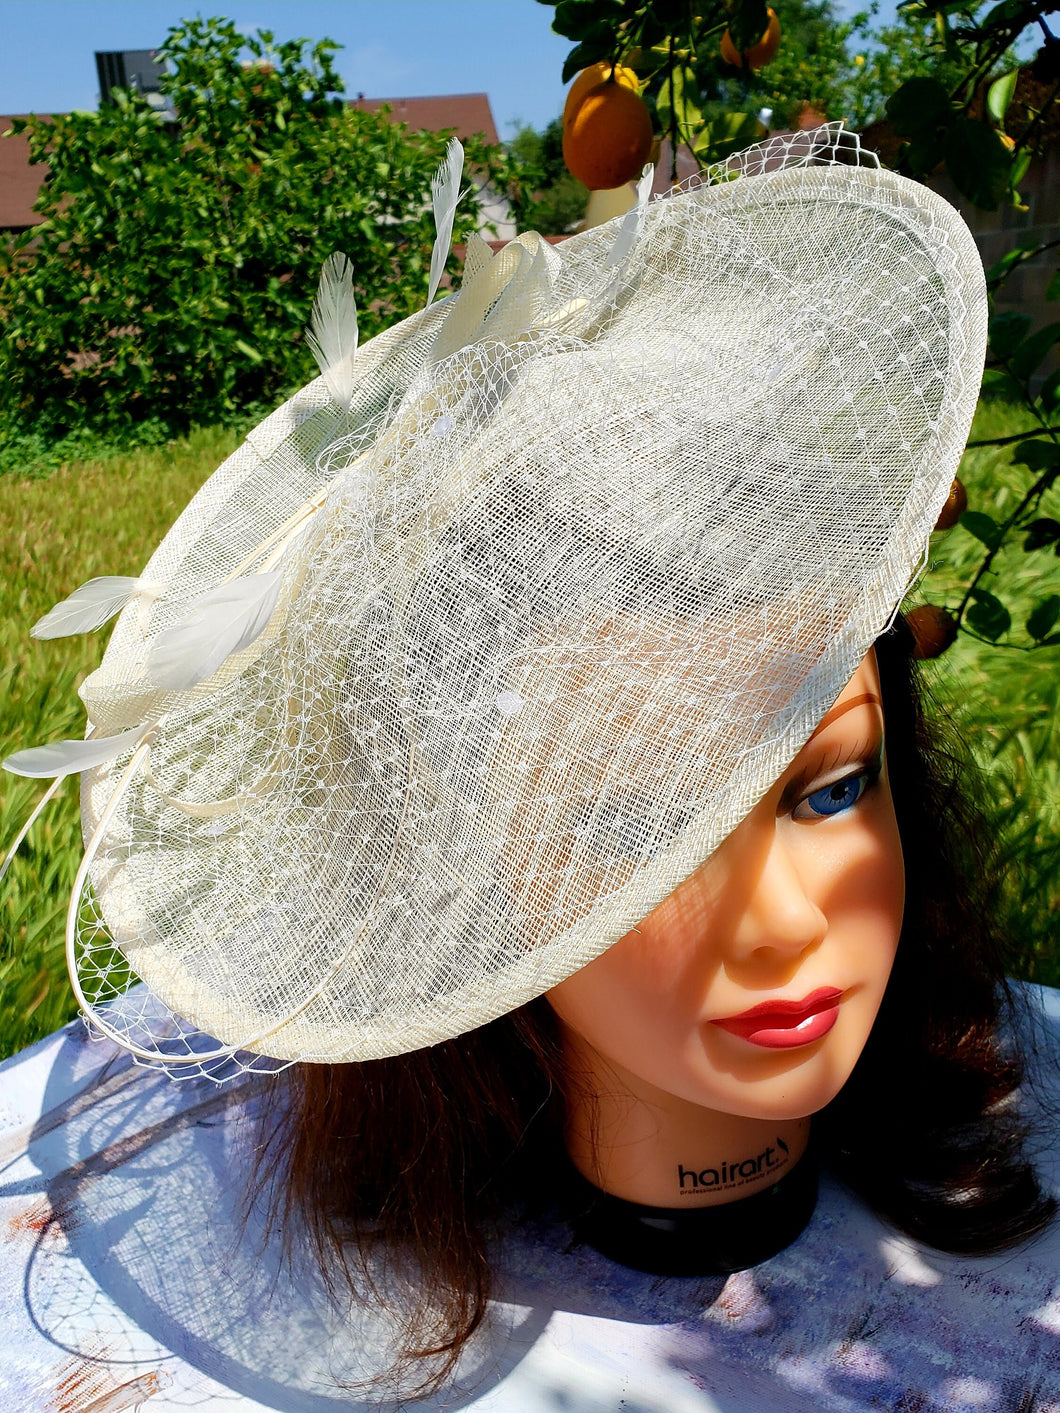 Pale Nude Sinamay Fascinator. Derby Race Bridal Church Hat. Funeral Mini Hat. Costume Feather Hairband Head Accessory.Headpiece